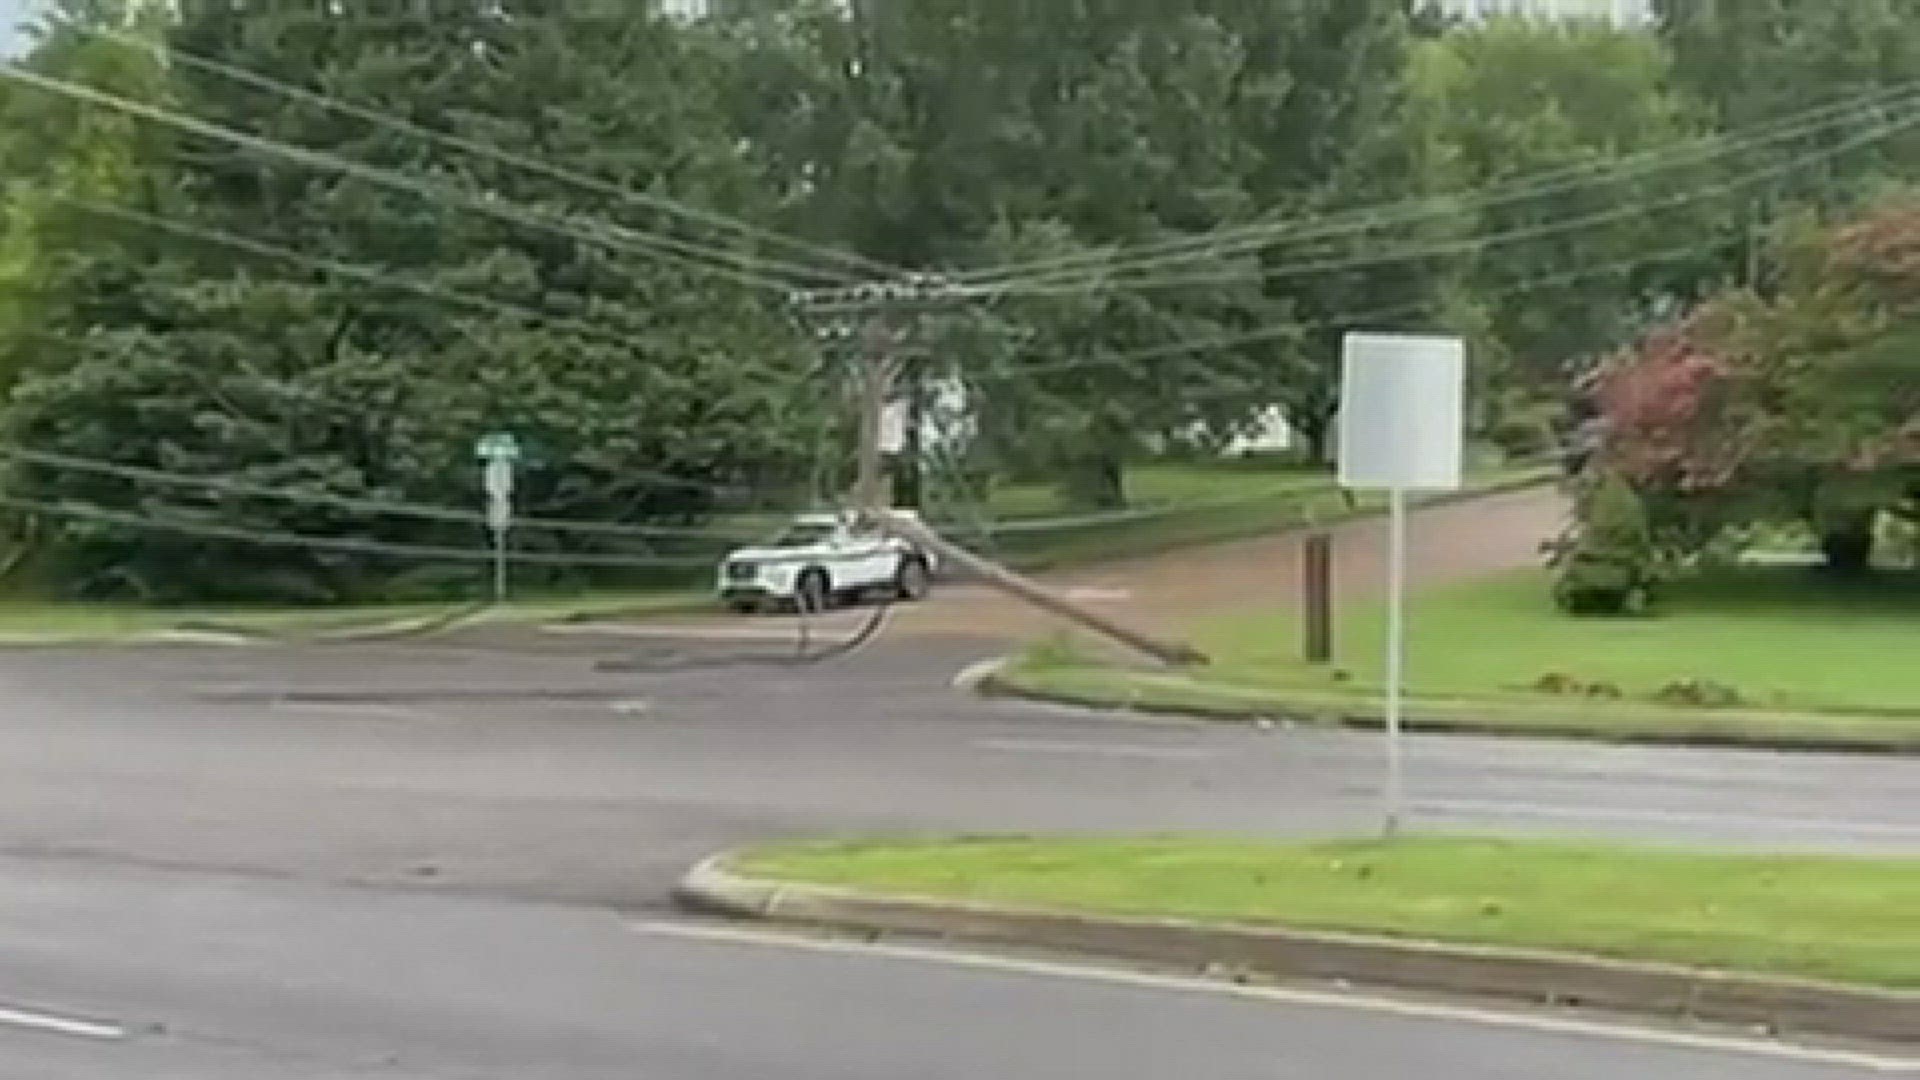 Broken Pole at Middlebrook Pike and Fox Lonas Road
Credit: Christopher Augustus